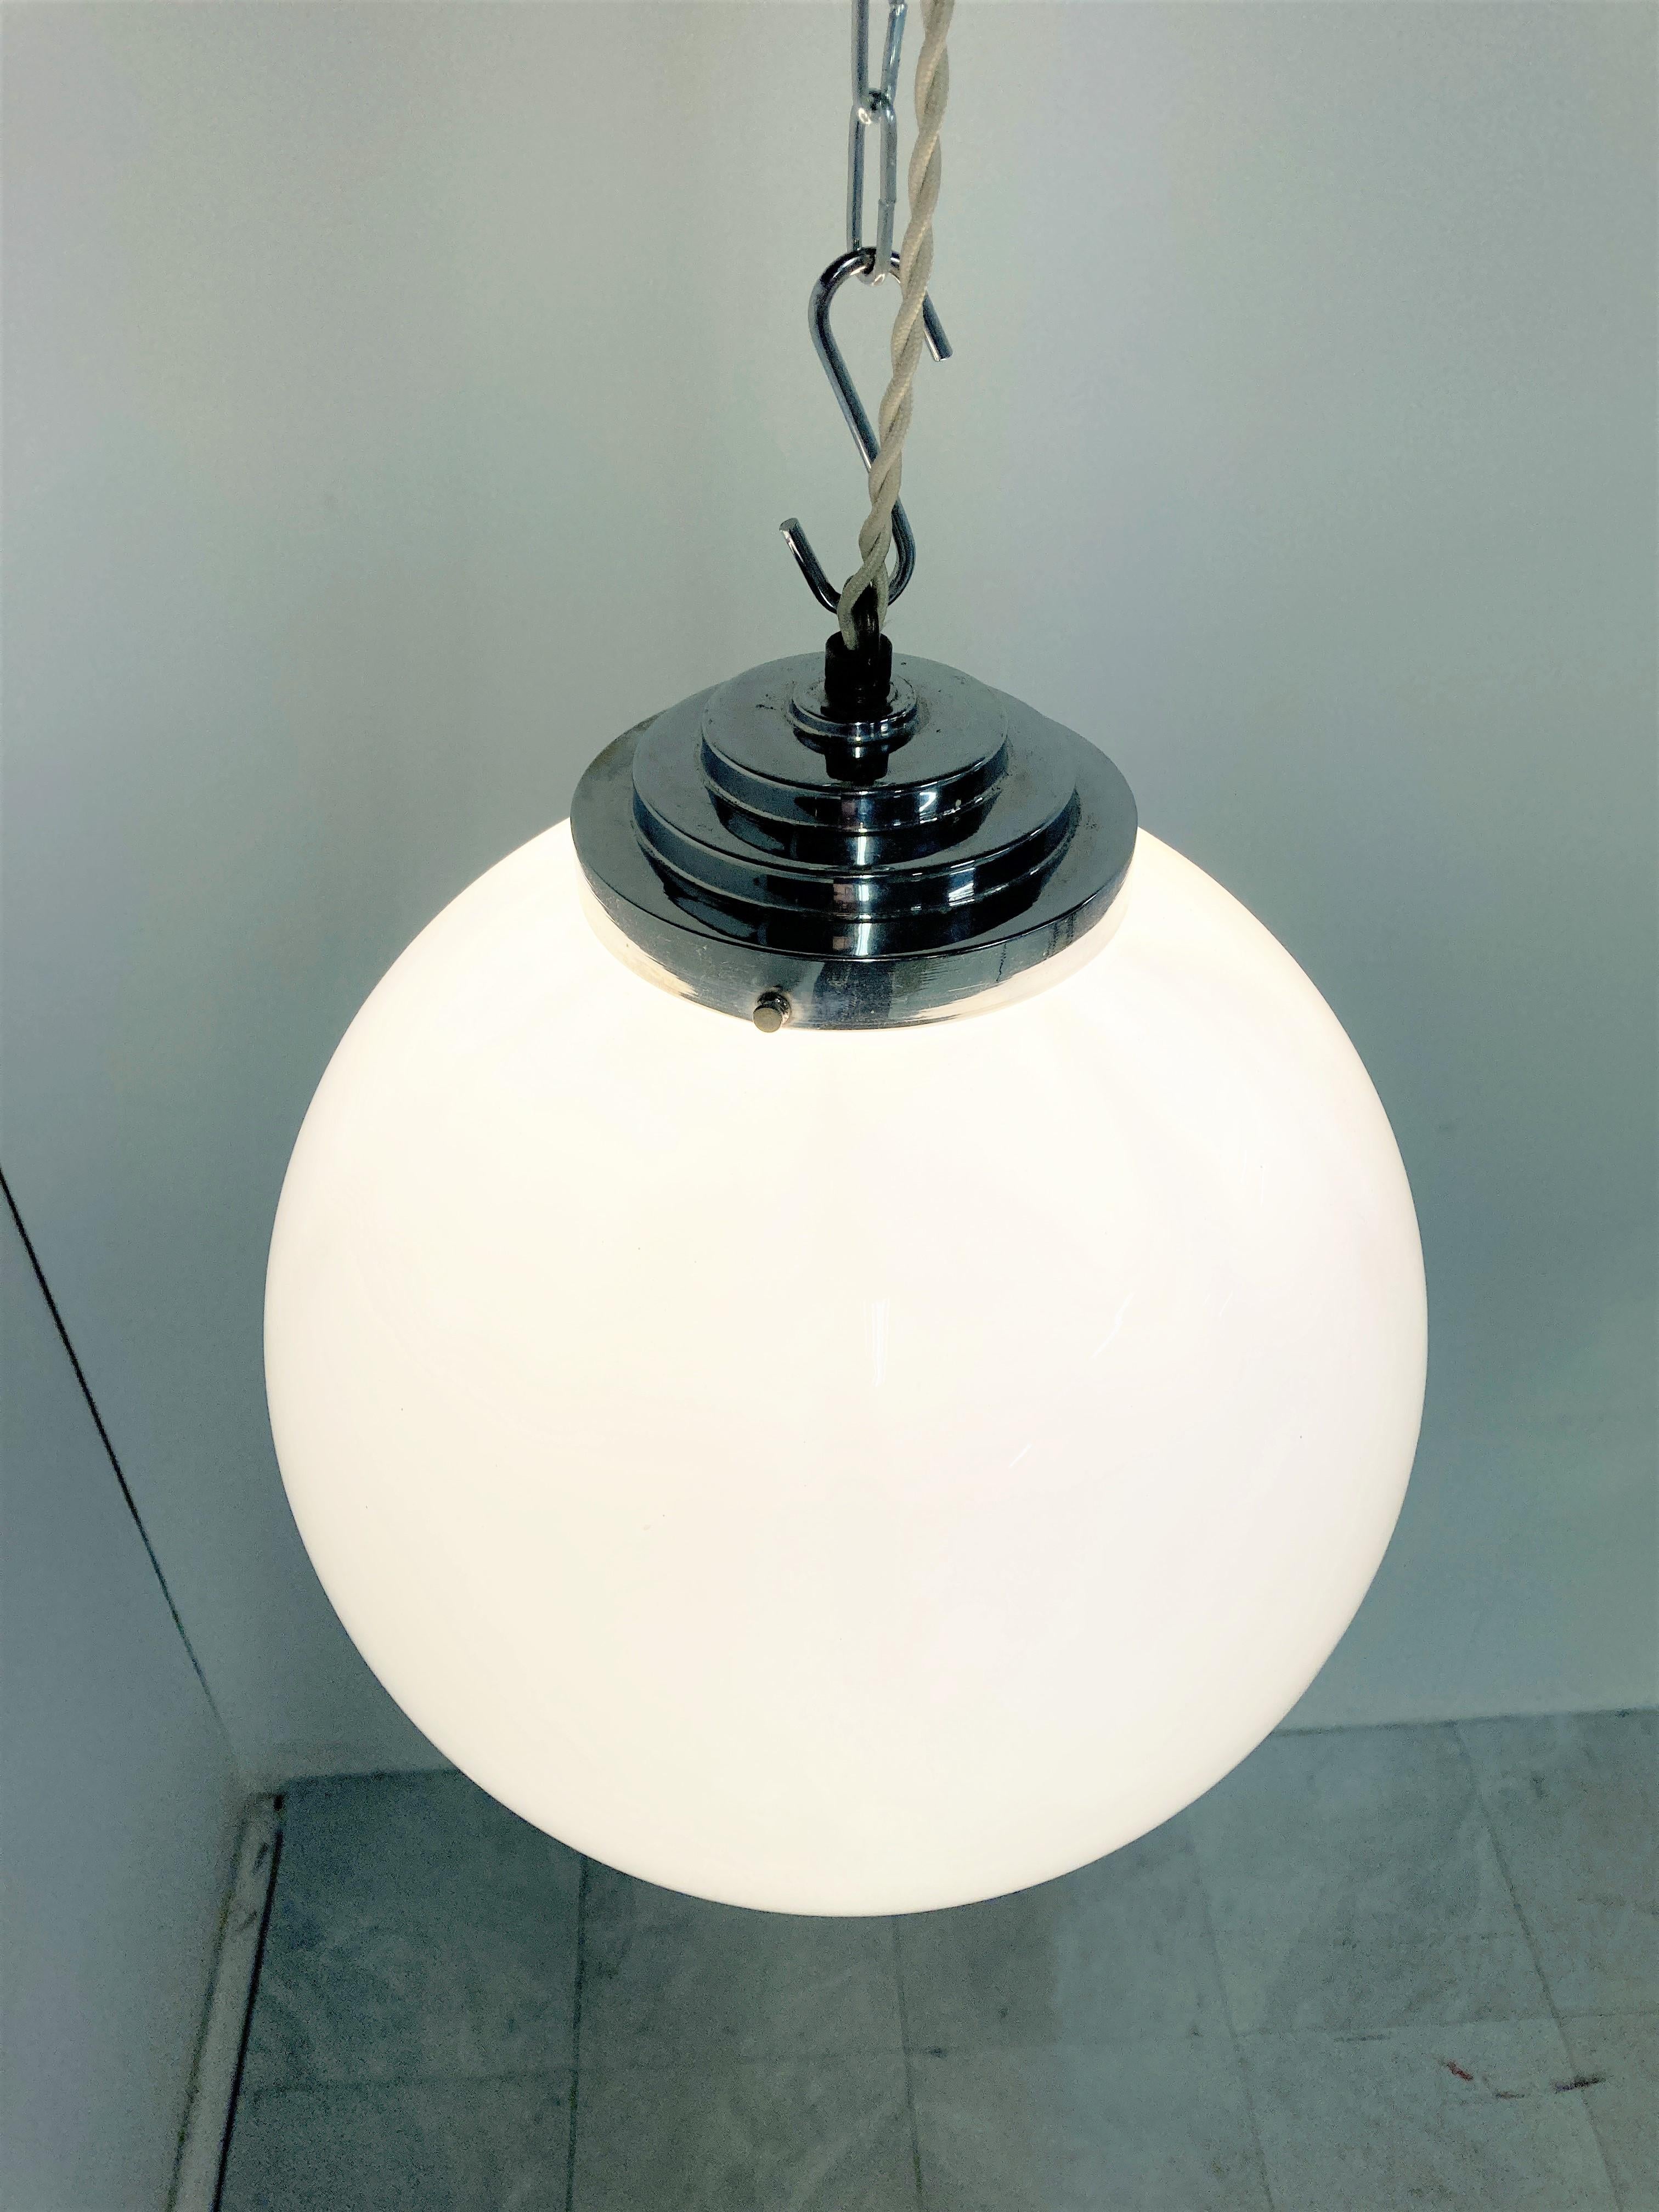 Antique Art Deco hallway pendant light.

This lamp is very typical for the Art Deco era and was widely used to be hung in hallways, offices or larger public places.

The lamp has the original stepped nikkel plated shade holder.

The shade